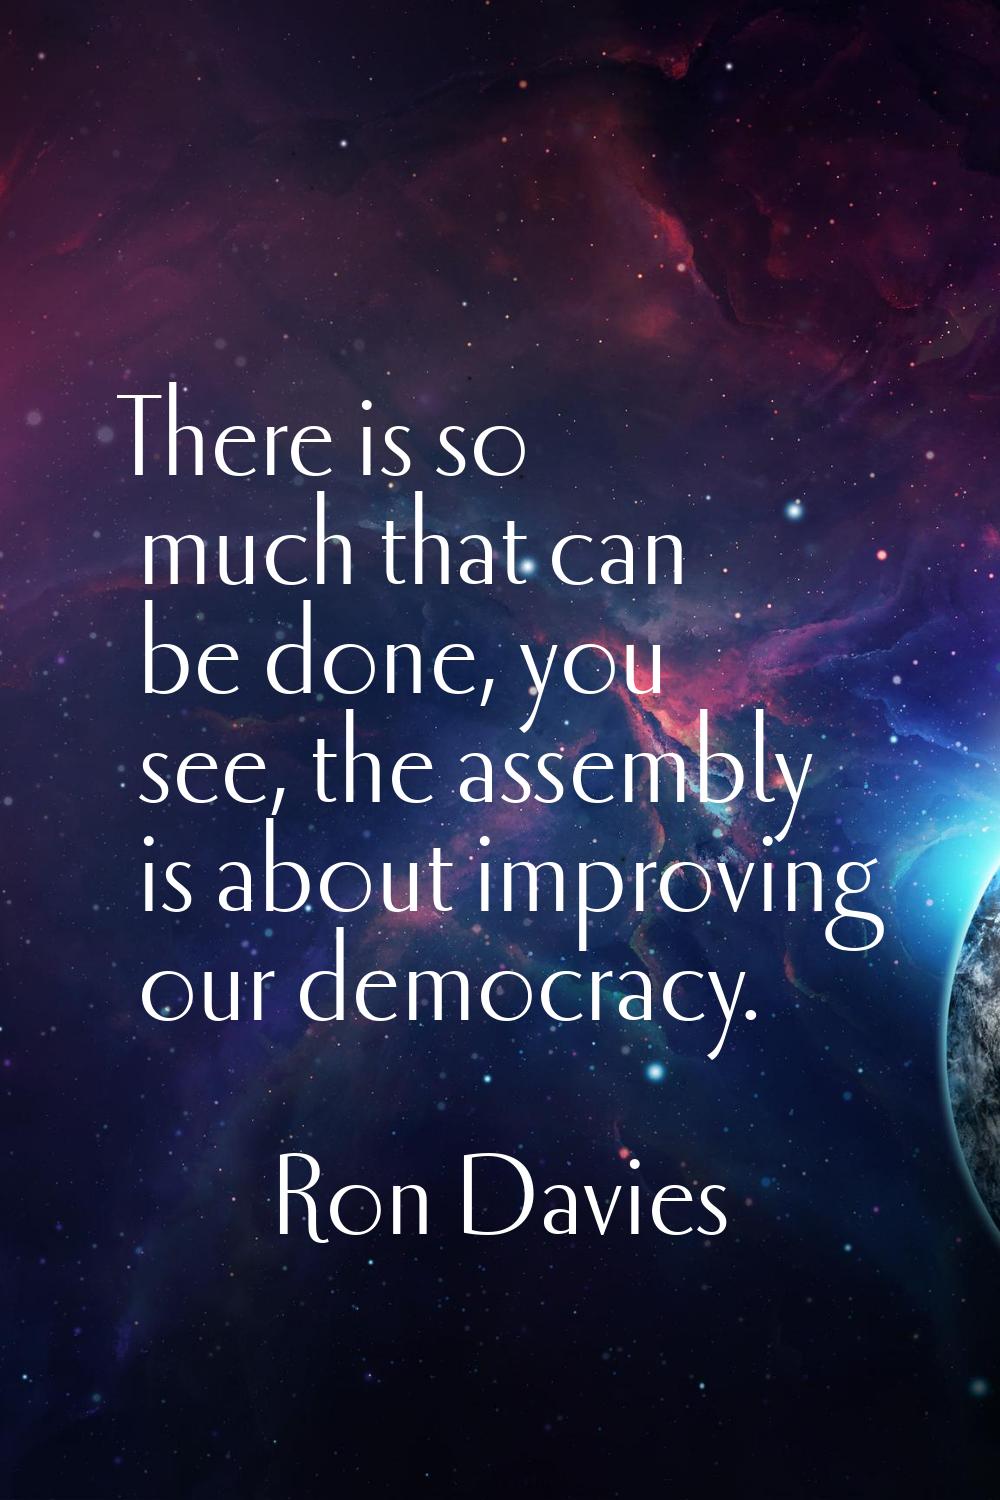 There is so much that can be done, you see, the assembly is about improving our democracy.